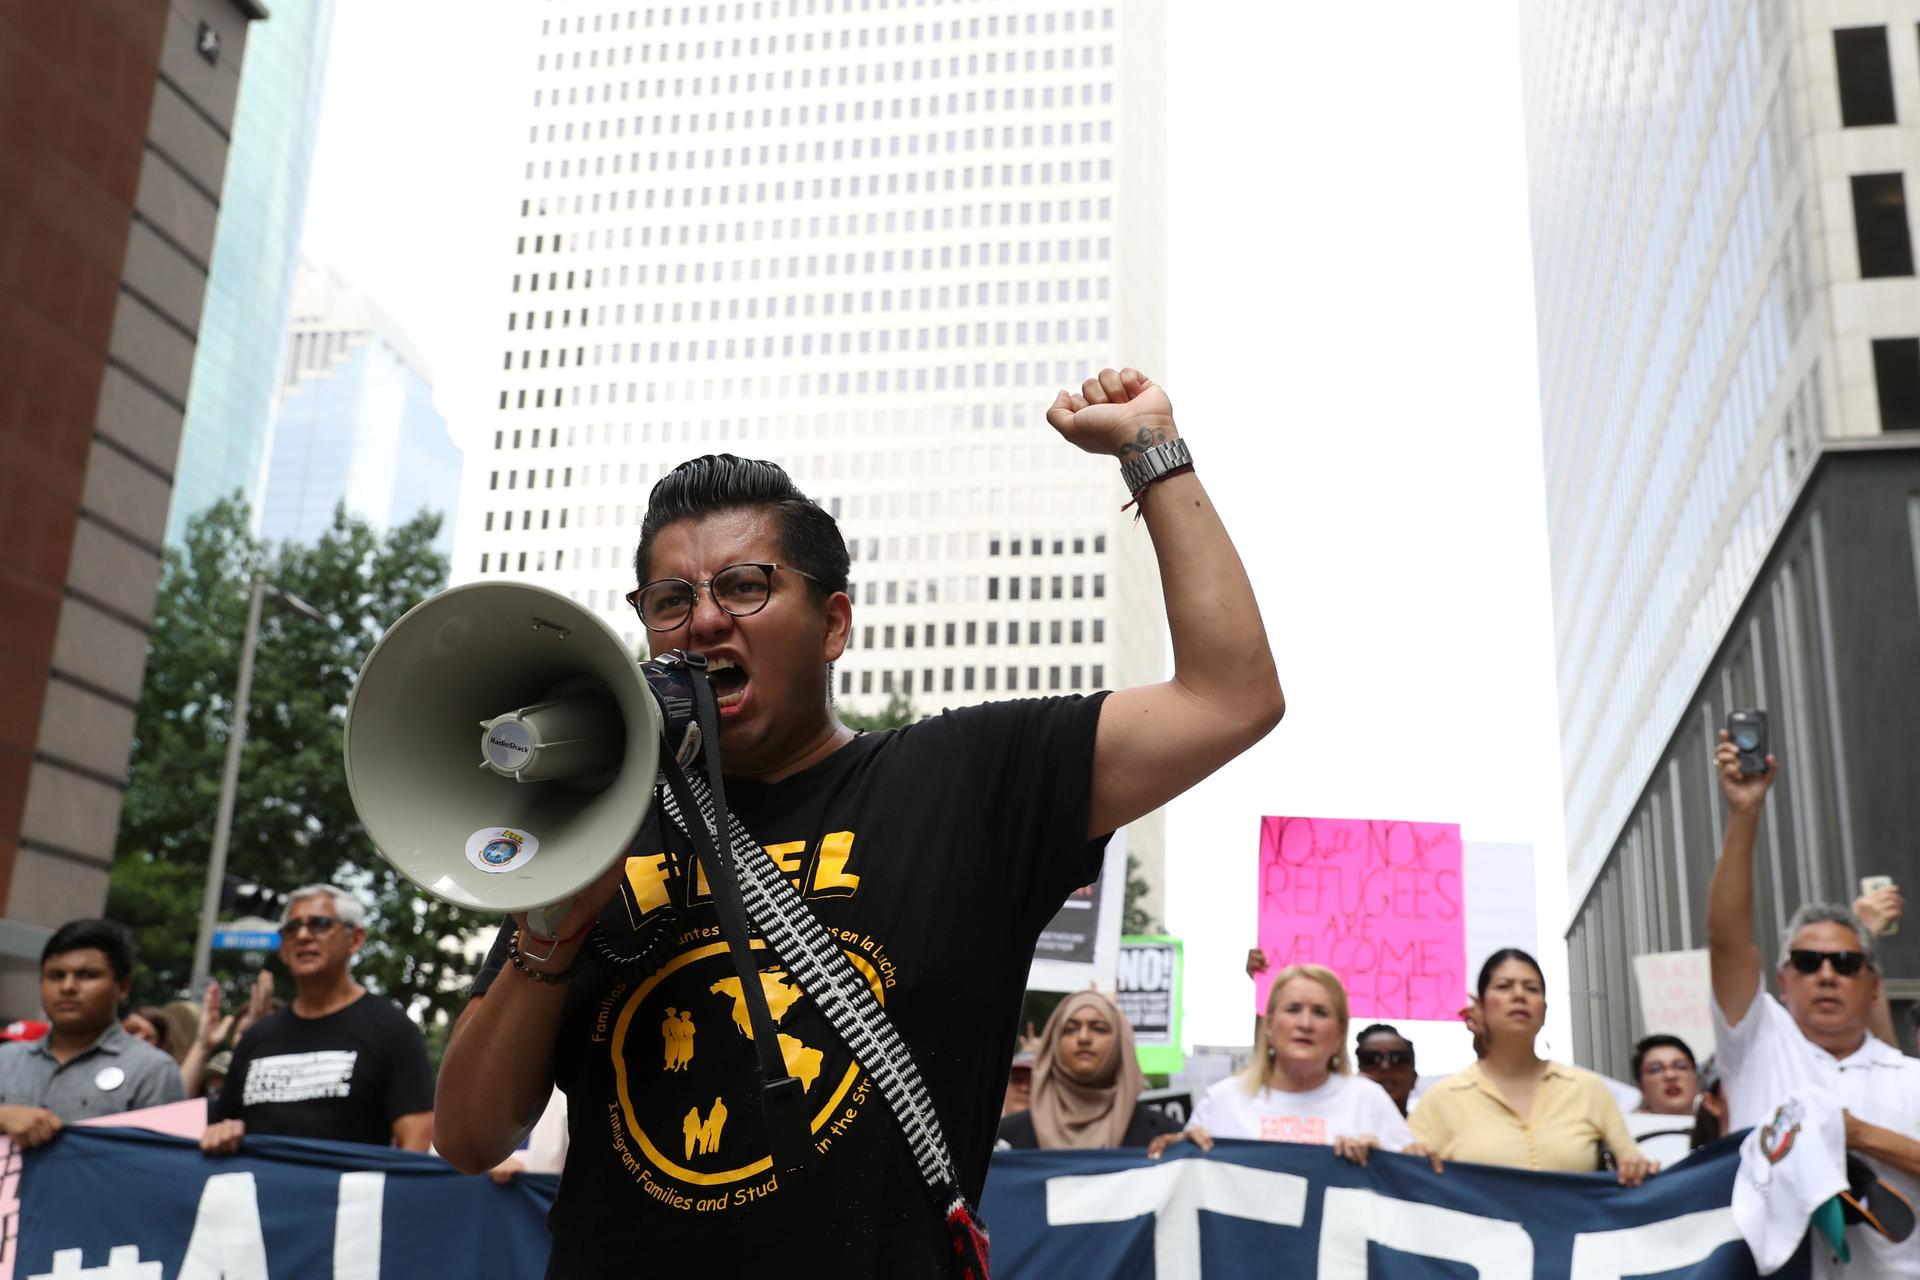 Cesar Espinosa, an immigrant rights' activist and head of FIEL, leads demonstrators protesting the Trump administration's immigration policies as part of a "Families Belong Together" rally in Houston, Texas, June 30, 2018.